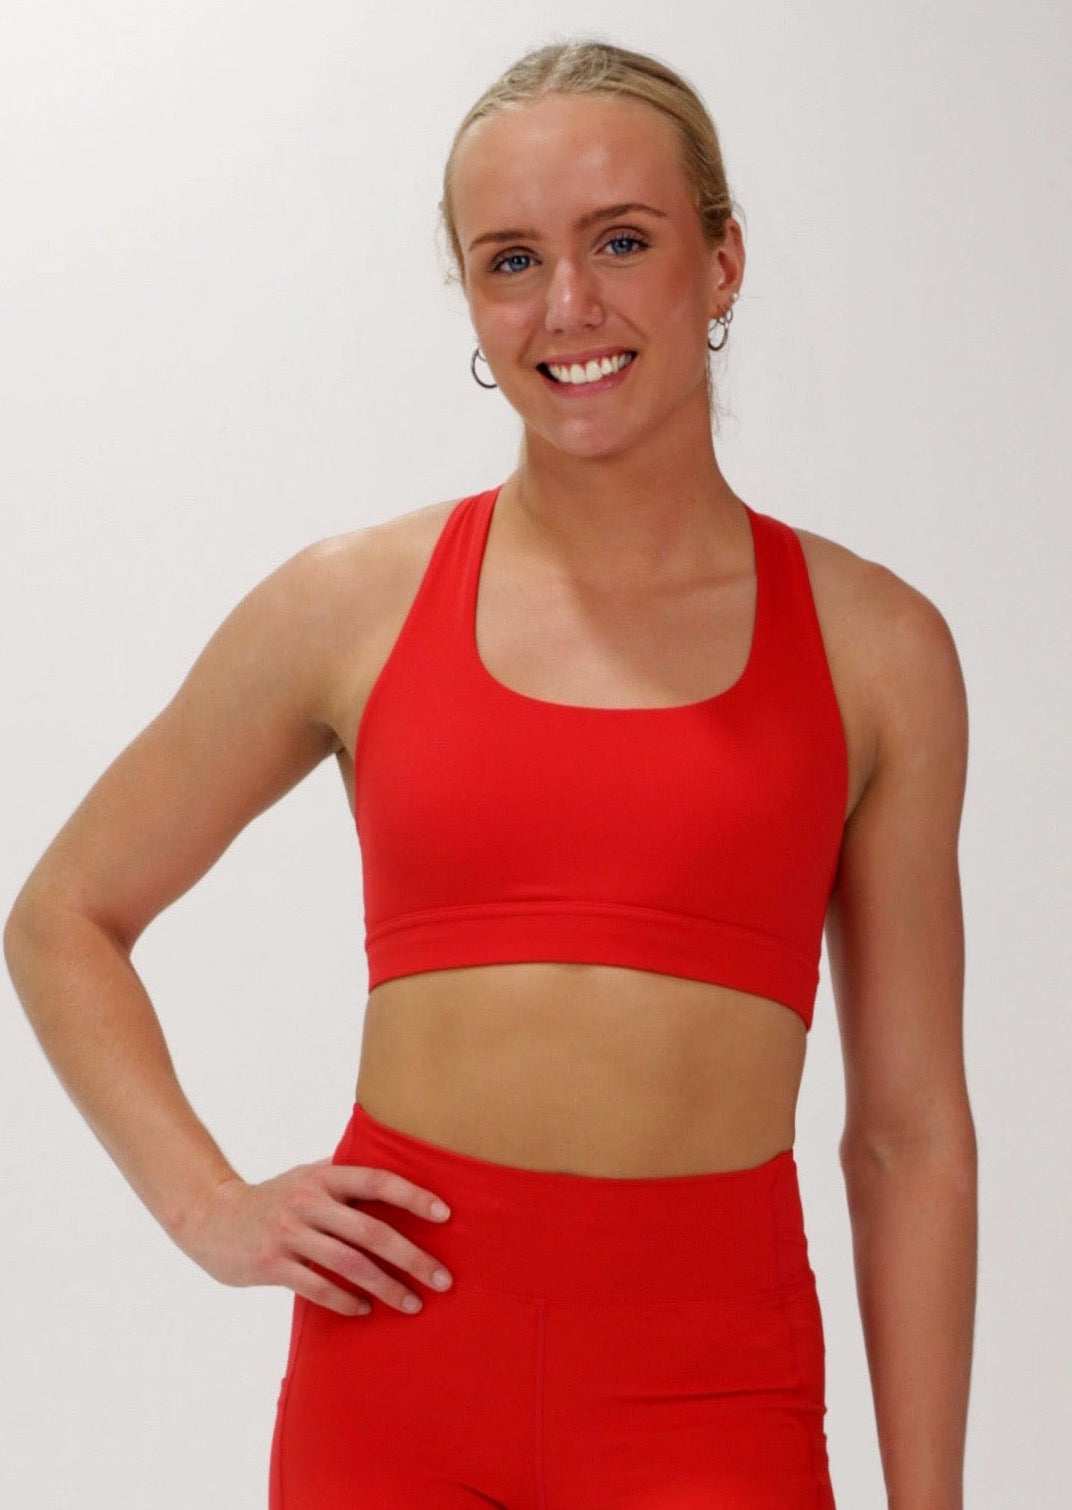 The SF ELITE CROP TOP is designed with cross-over back straps that compliment the curve of your shoulder blades and allow your arms to move freely while offering maximum support. This crop top is supportive, functional, and looks amazing on, the perfect crop top for any running session. Best running top for all runners.